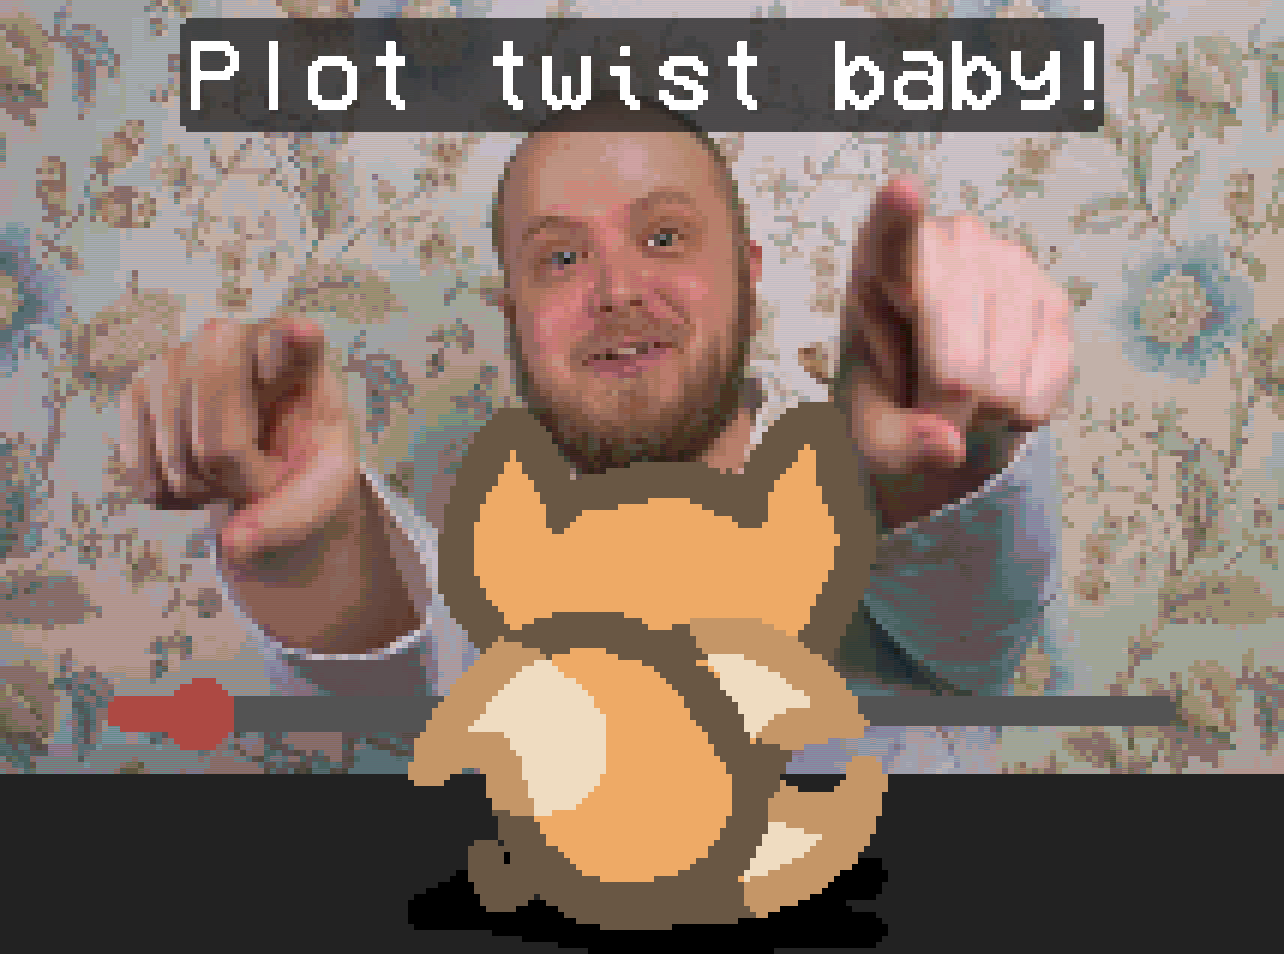 a three tailed fox watching hbomberguy's new video, the scene being hbomb saying "Plot Twist Baby!"